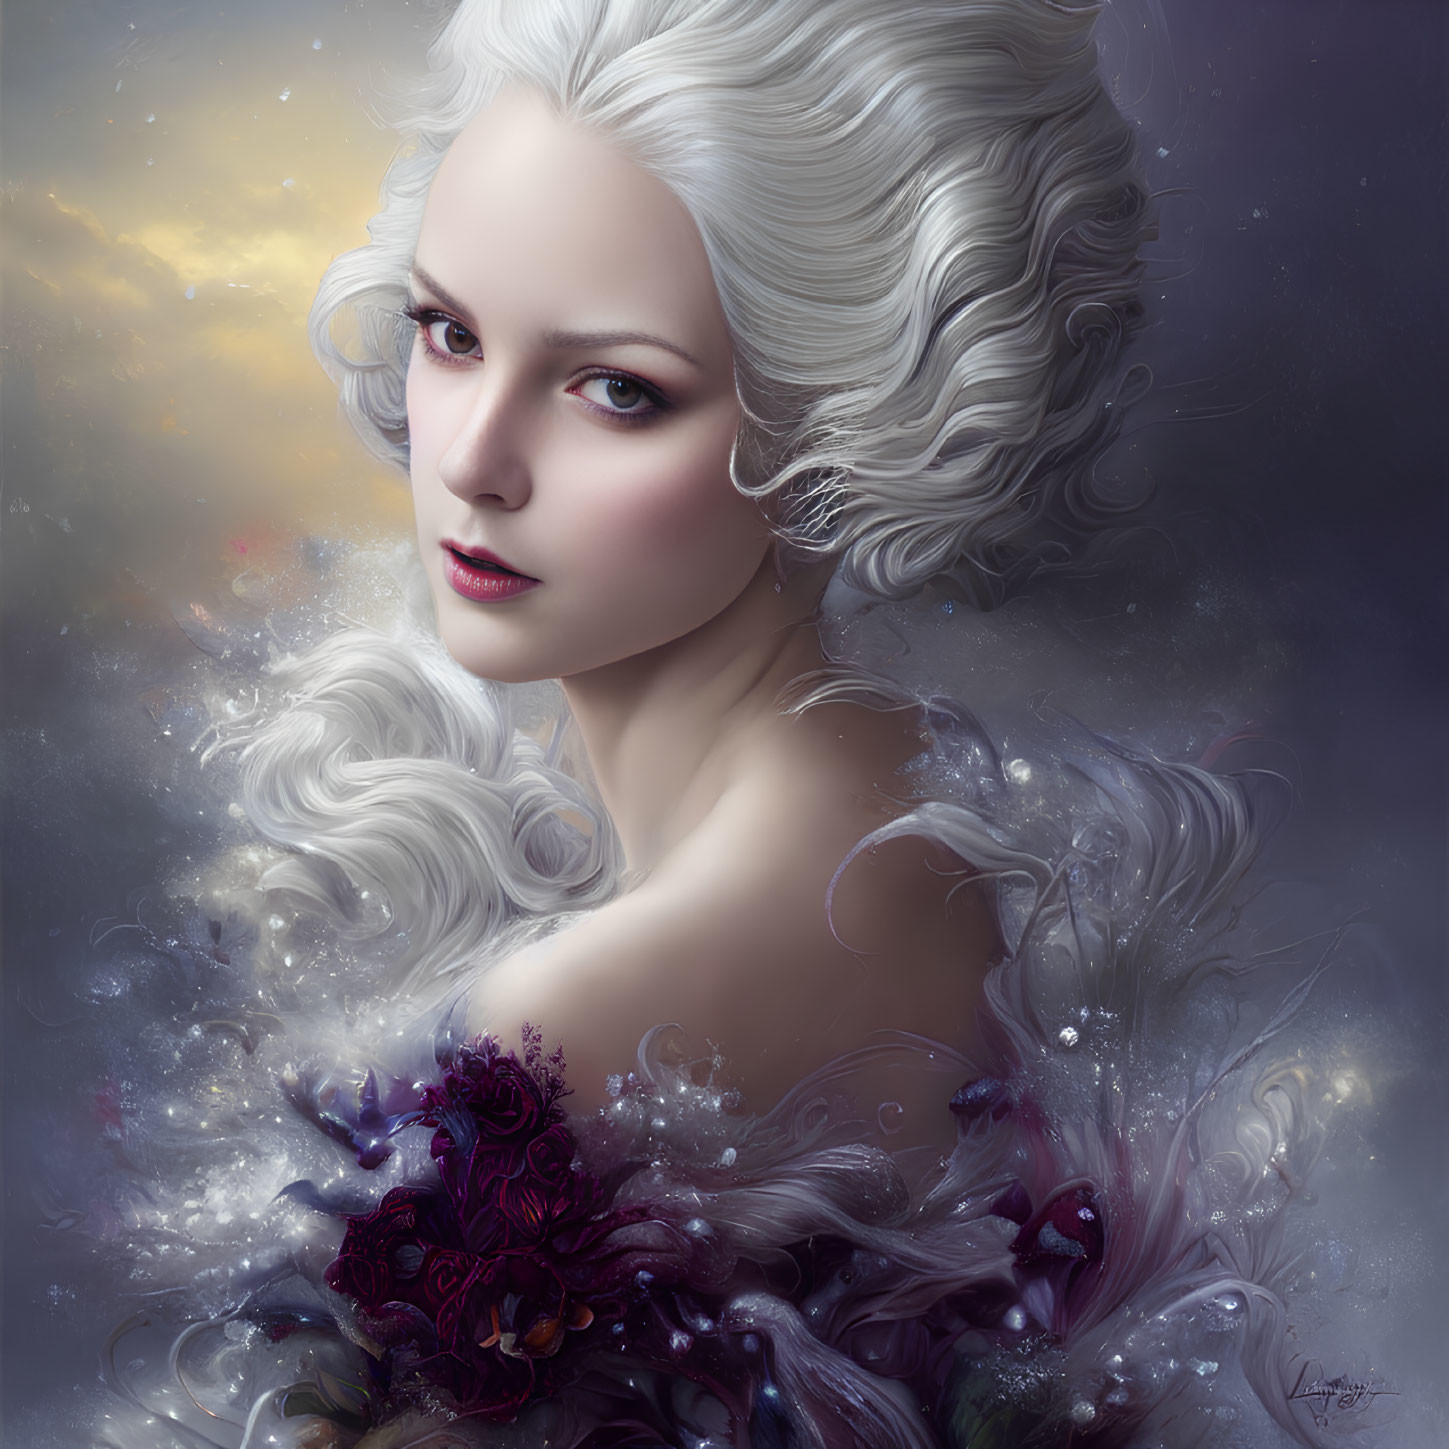 Portrait of woman with pale skin, gray eyes, white hair, ethereal wisps, twilight backdrop